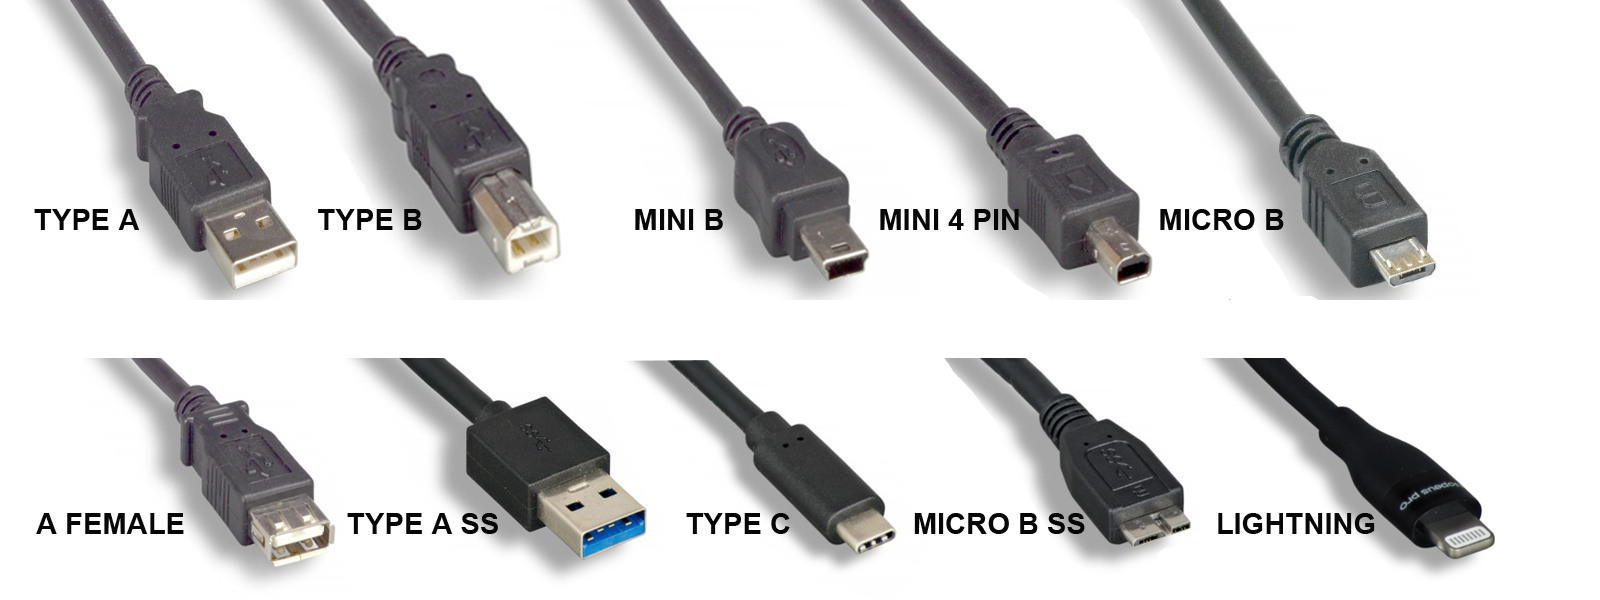 USB Type B Connectors & Pinouts, What is USB Type B?